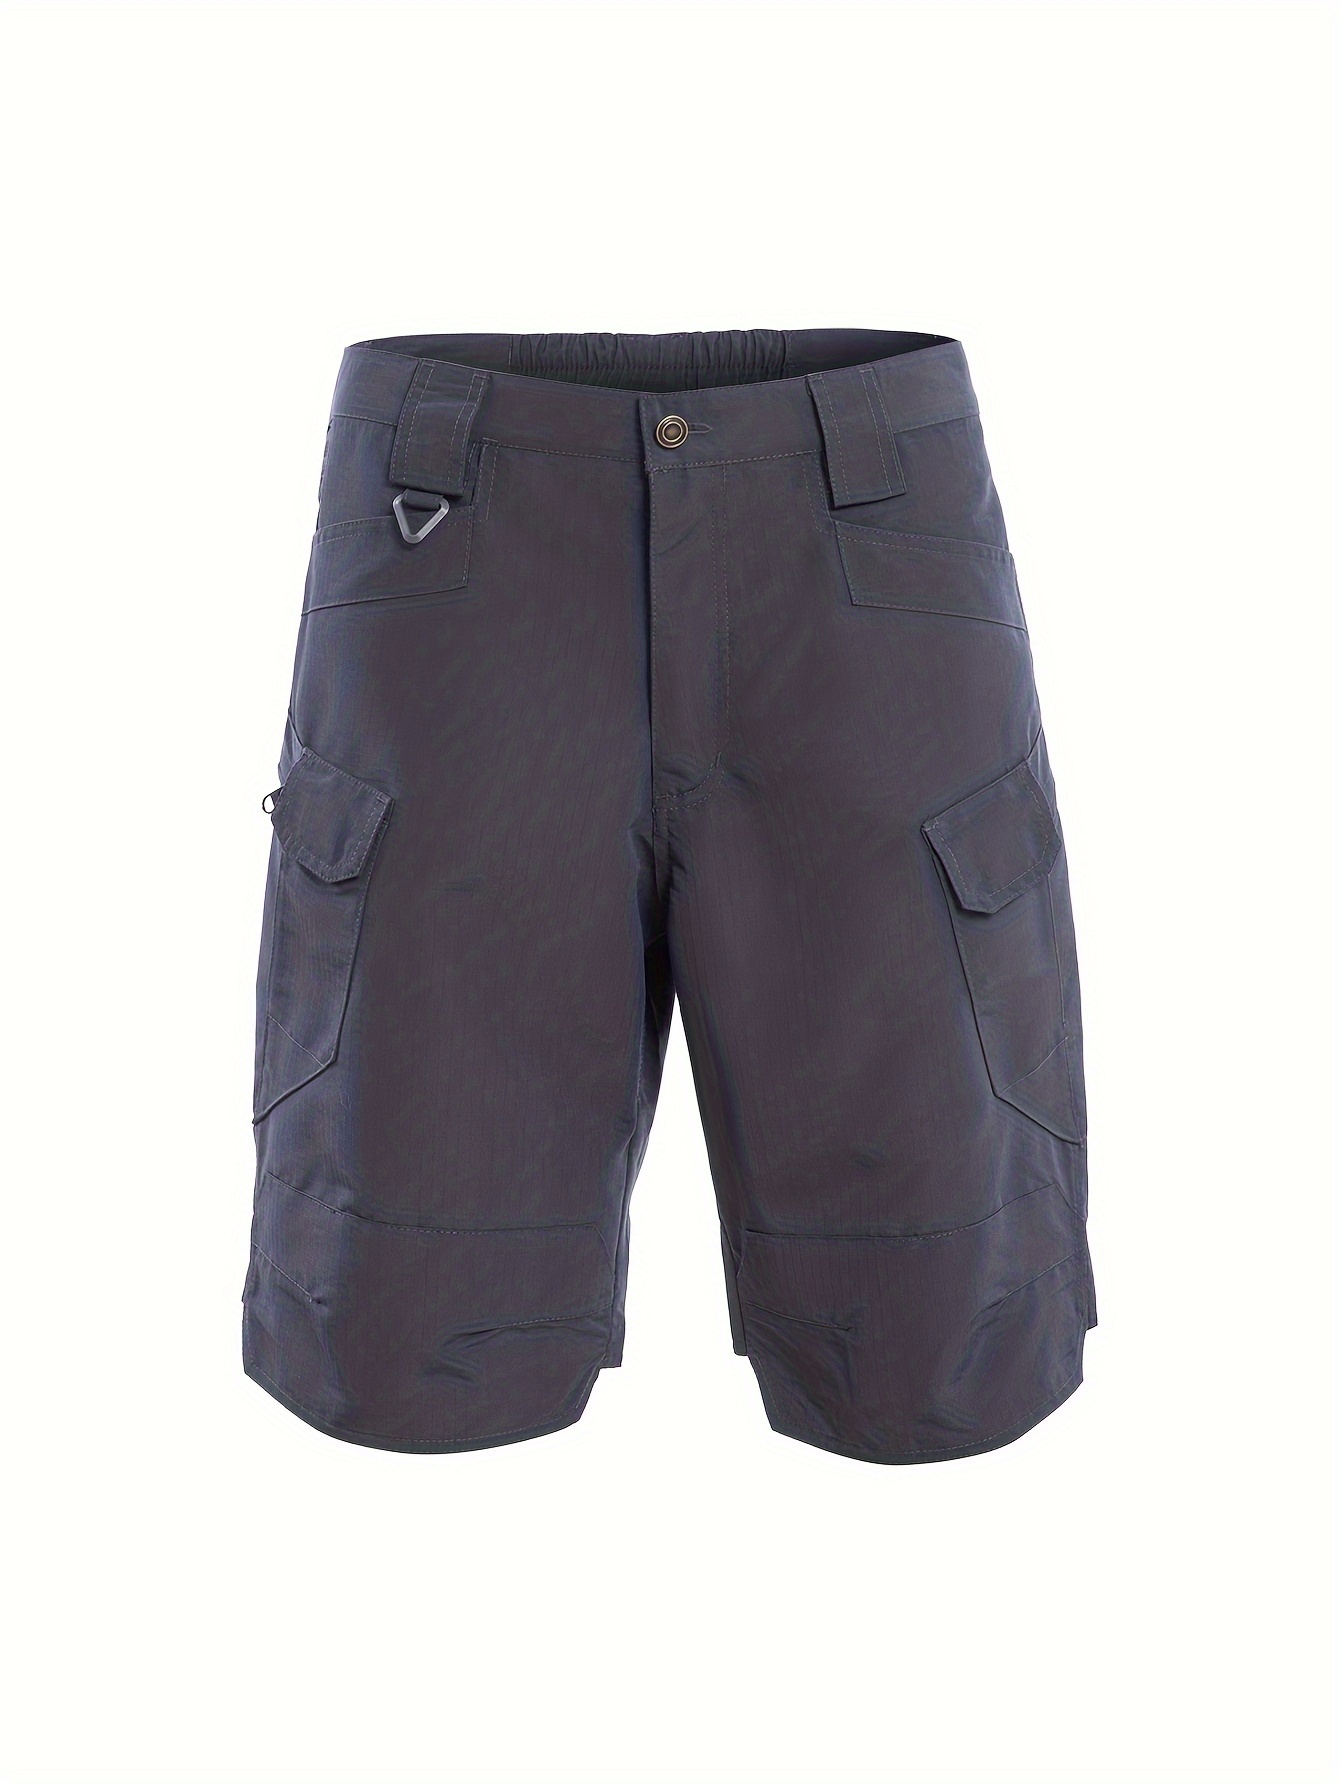 Mens Outdoor Tactical Cargo Short Quick Dry Sports Multi Pockets